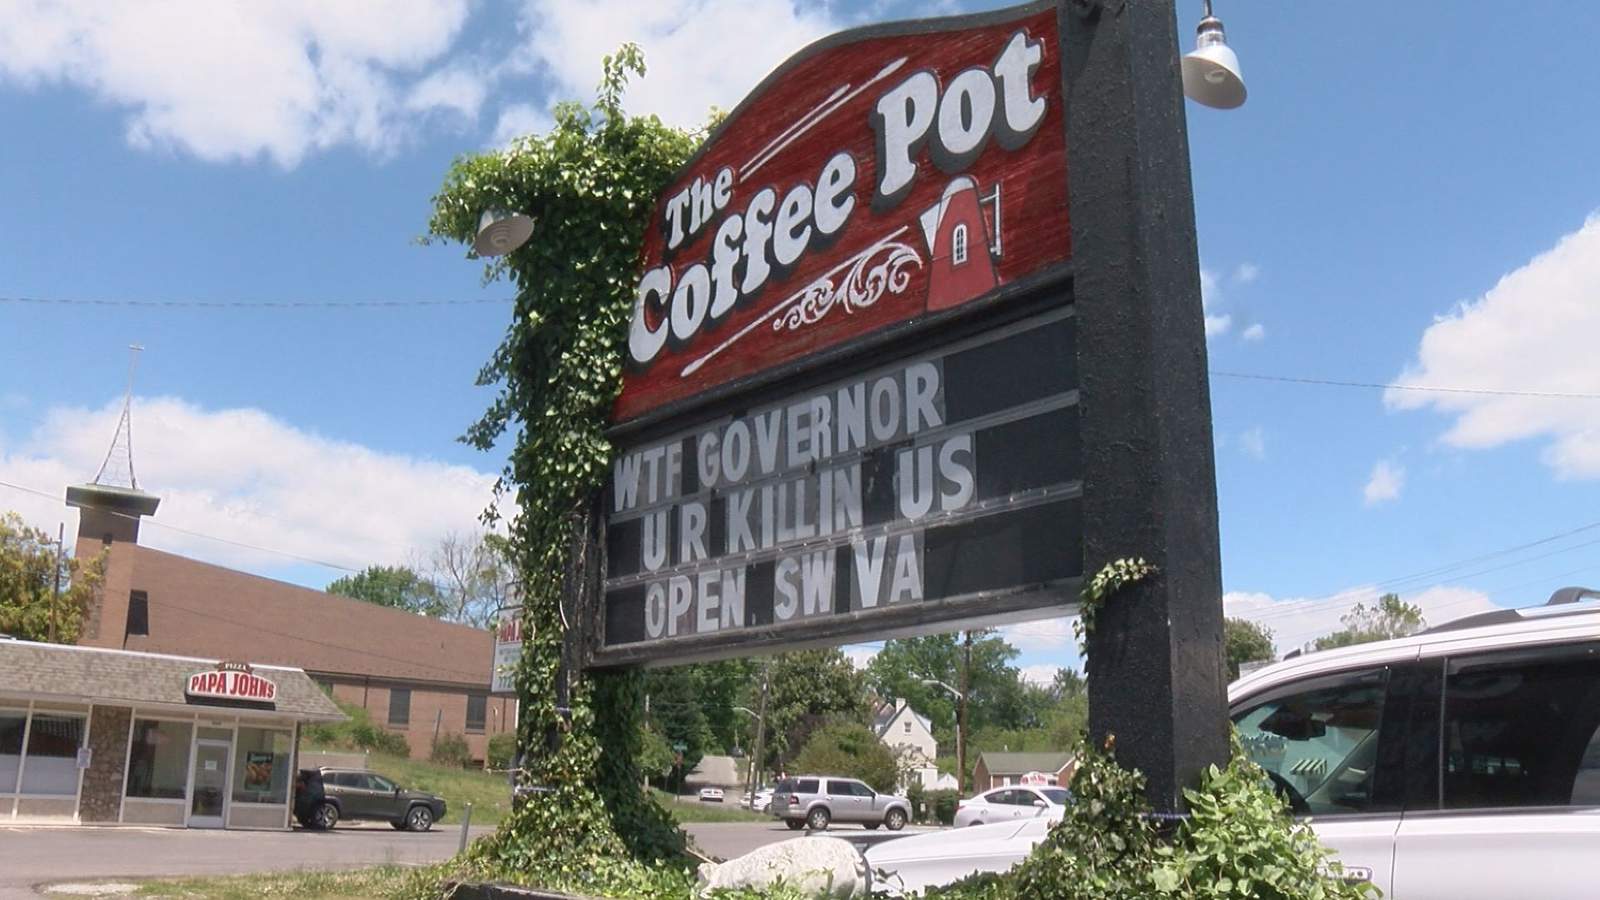 ‘WTF governor’: Roanoke restaurant uses marquee to send message to Virginia Gov. Ralph Northam